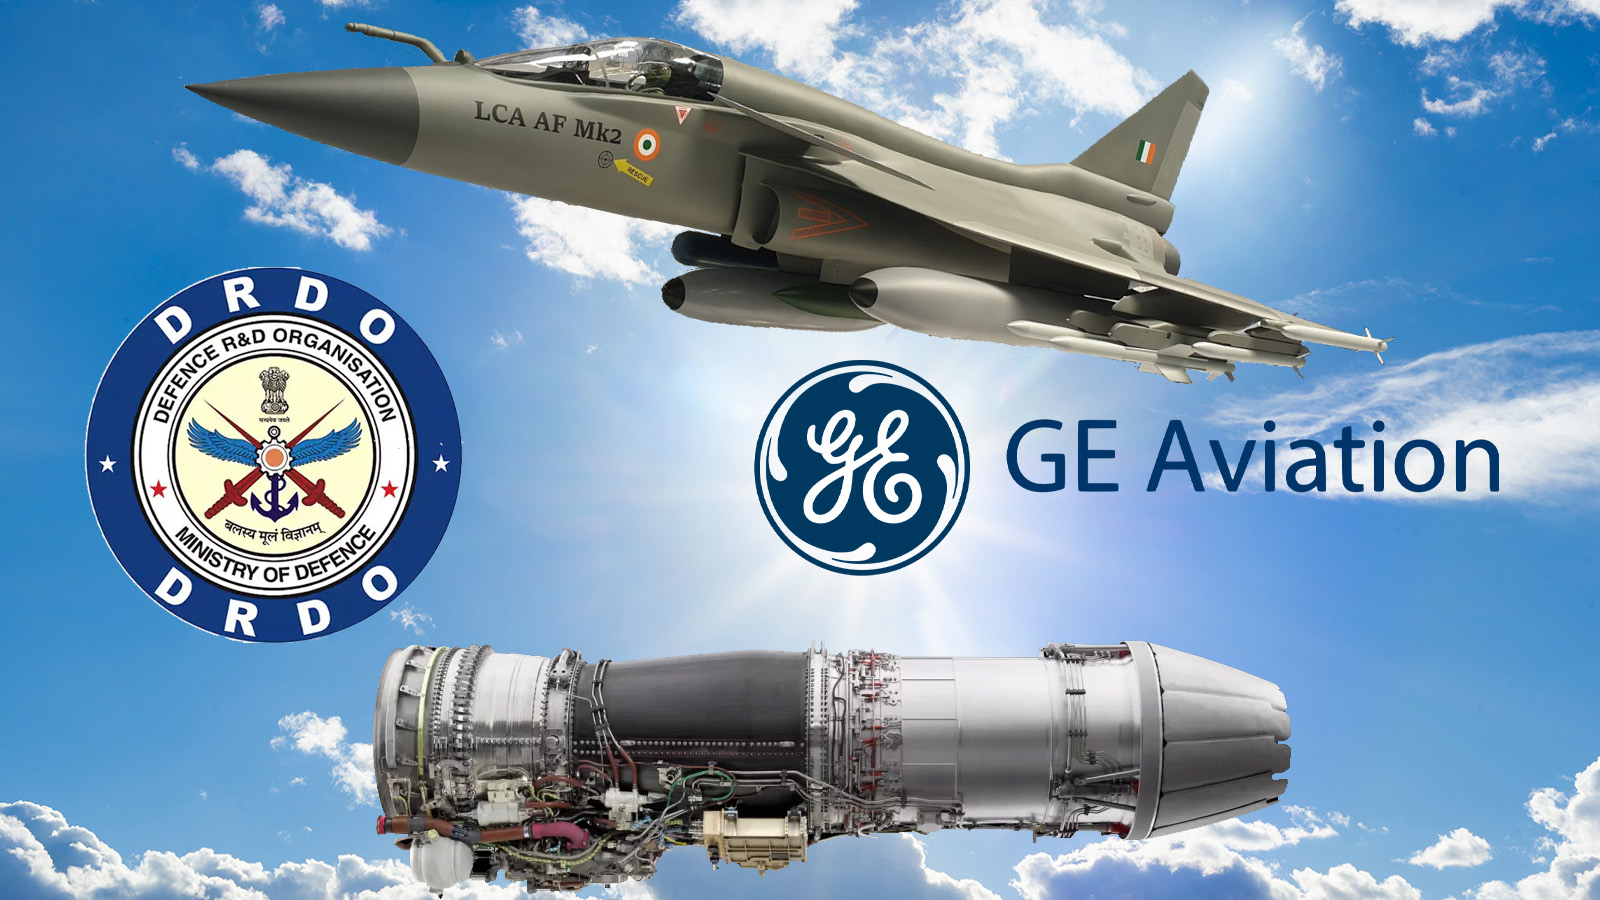 Made-In-India Ge Jet Engines To Strengthen Us-India Relations